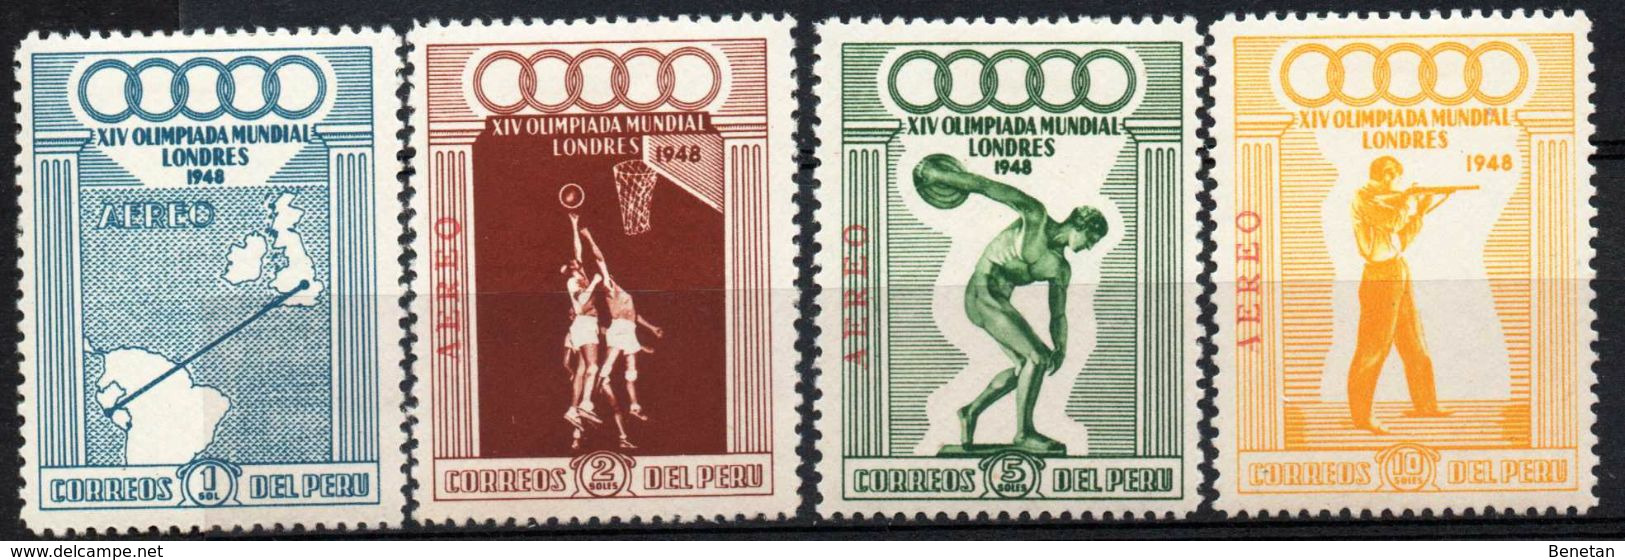 Olympic Games London 1948 PERU Yv# A71/4 Complete Set MH - Ete 1948: Londres